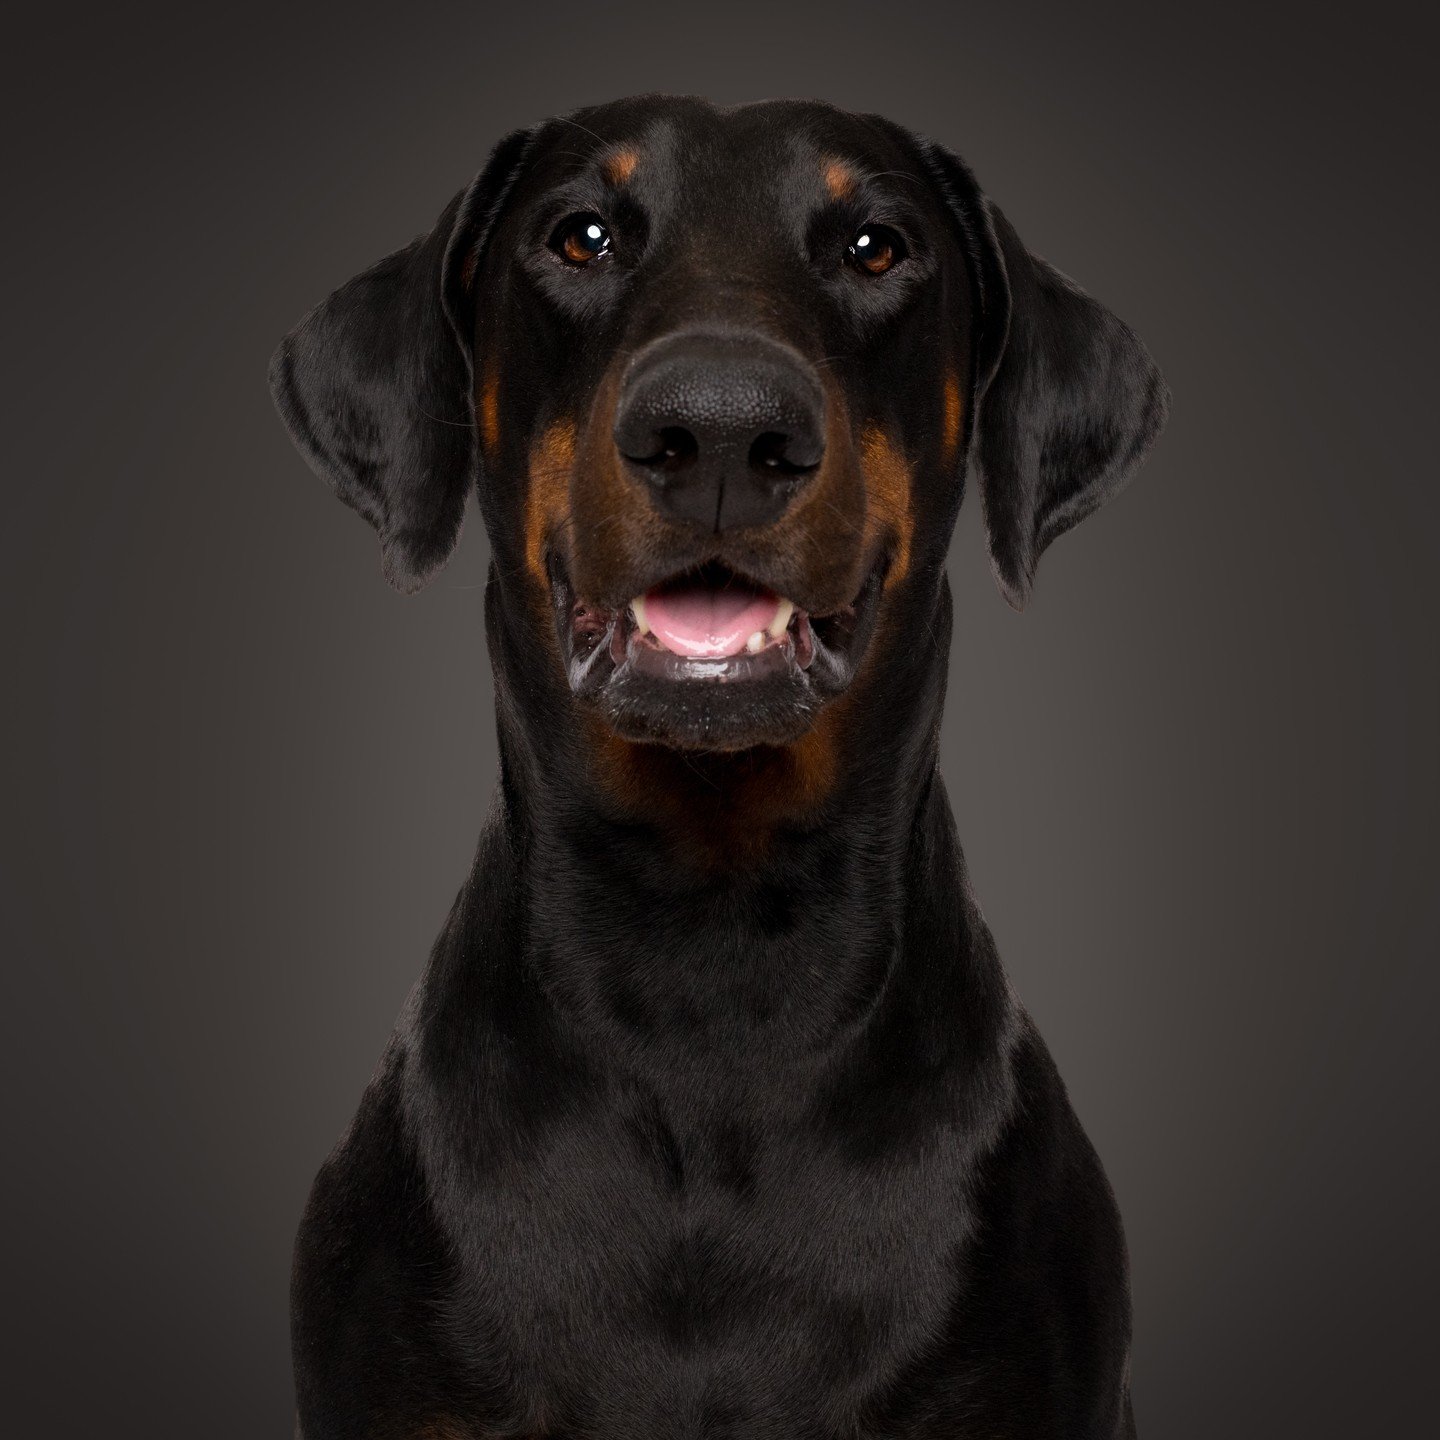 If there ever was a snoot that needs a boop 👉💢

Zulu the #doberman pup has a heart as big as his paws and a spirit that's just as adventurous.

Whether he's out on walkie, patrolling the yard, or lounging at home, Zulu brings joy, loyalty, and a to